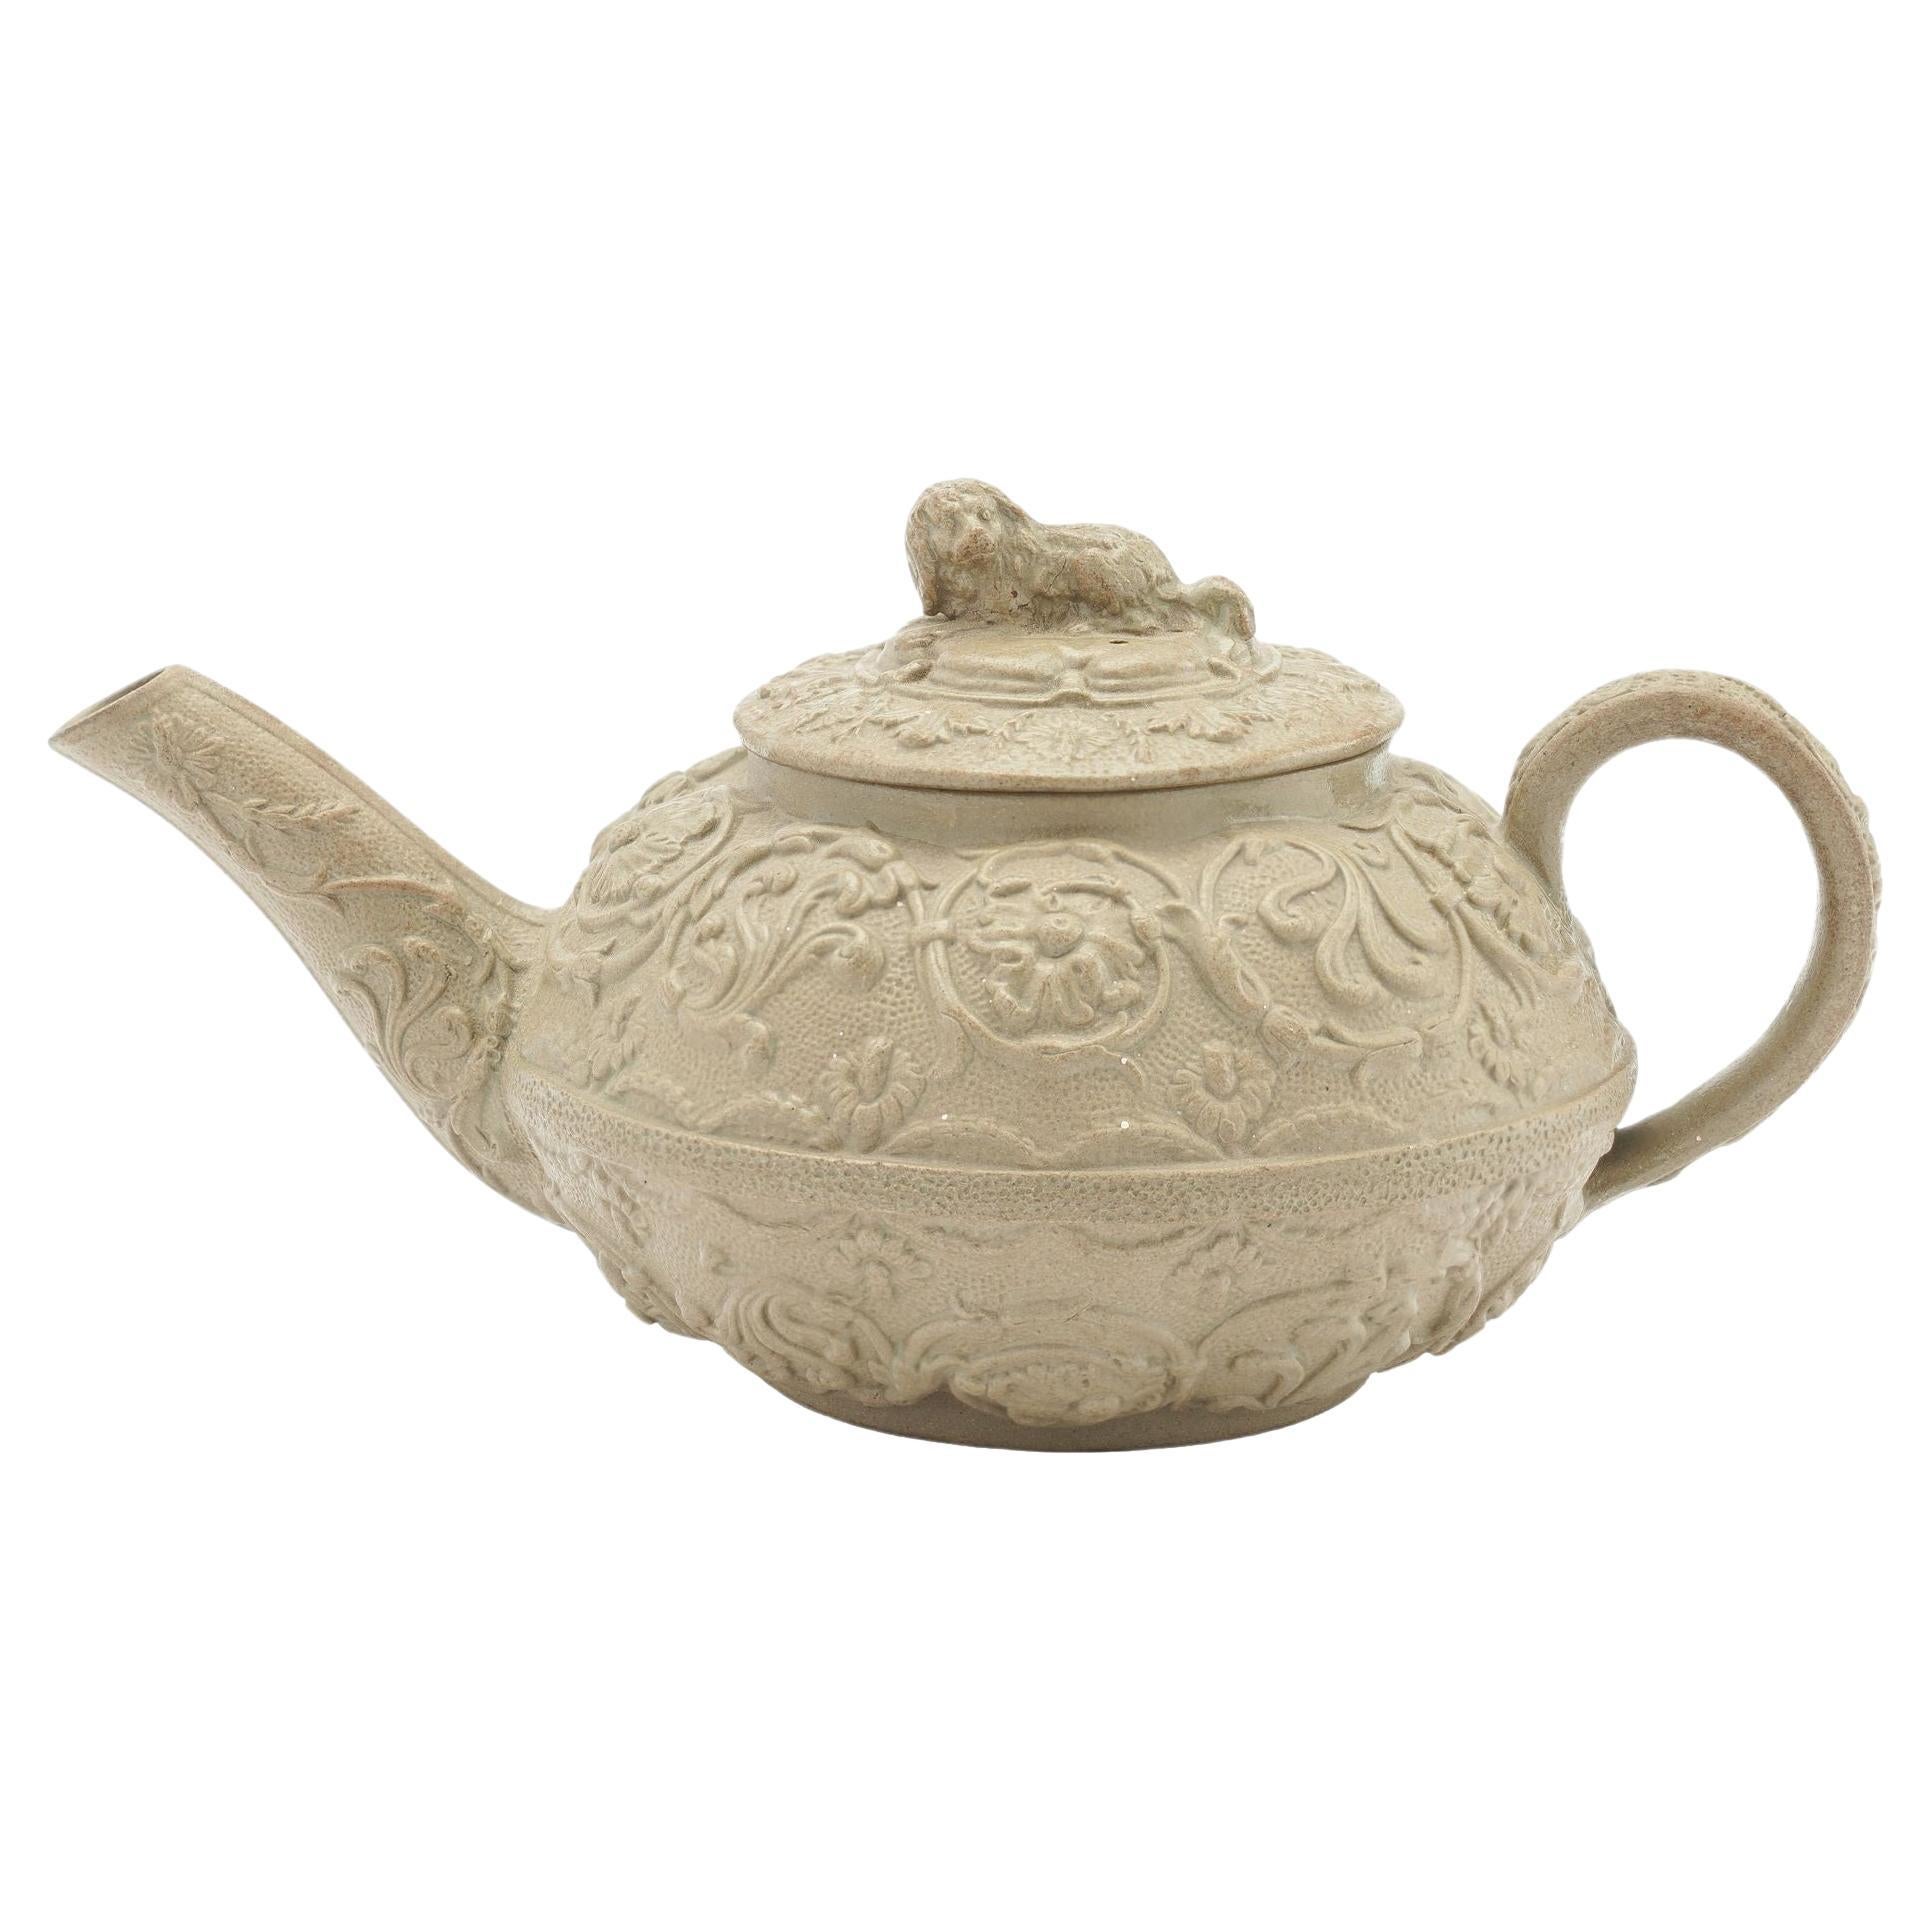 Stoneware tea pot with spaniel lid finial by Wedgwood, c. 1829 For Sale